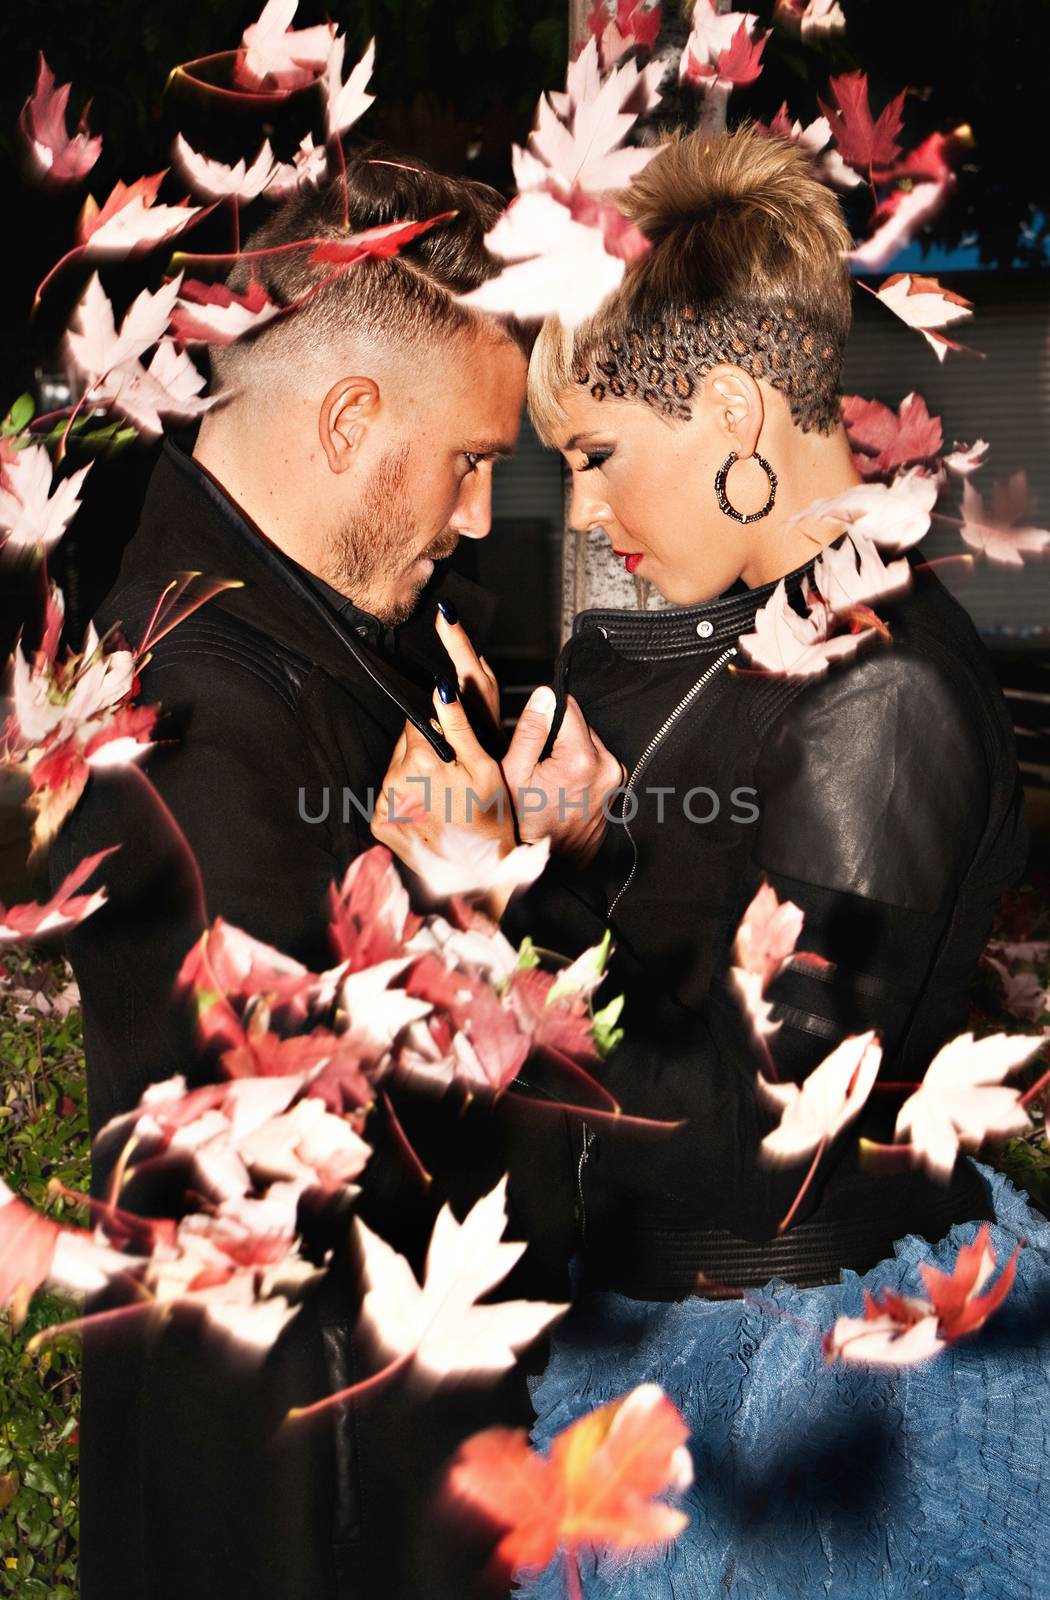 Romantic fashionable young couple caught with blowing leaves. Urban fashion photography. Vertical image.